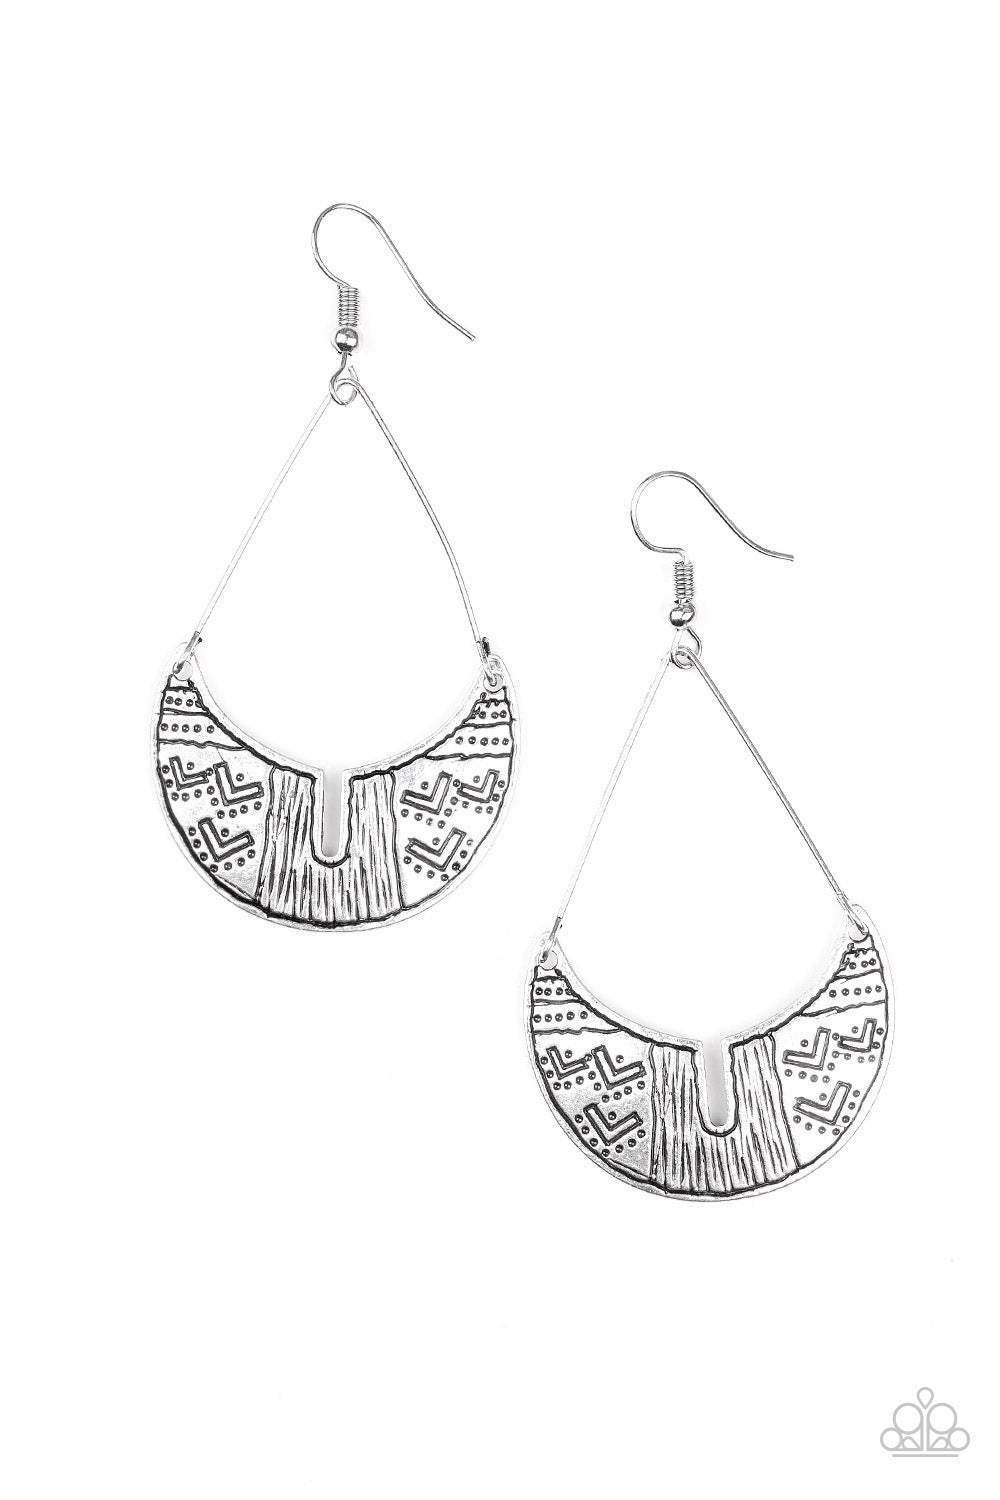 TRADING POST TRENDING - SILVER TRIANGLE WIRE TEXTURED TRIBAL EARRINGS